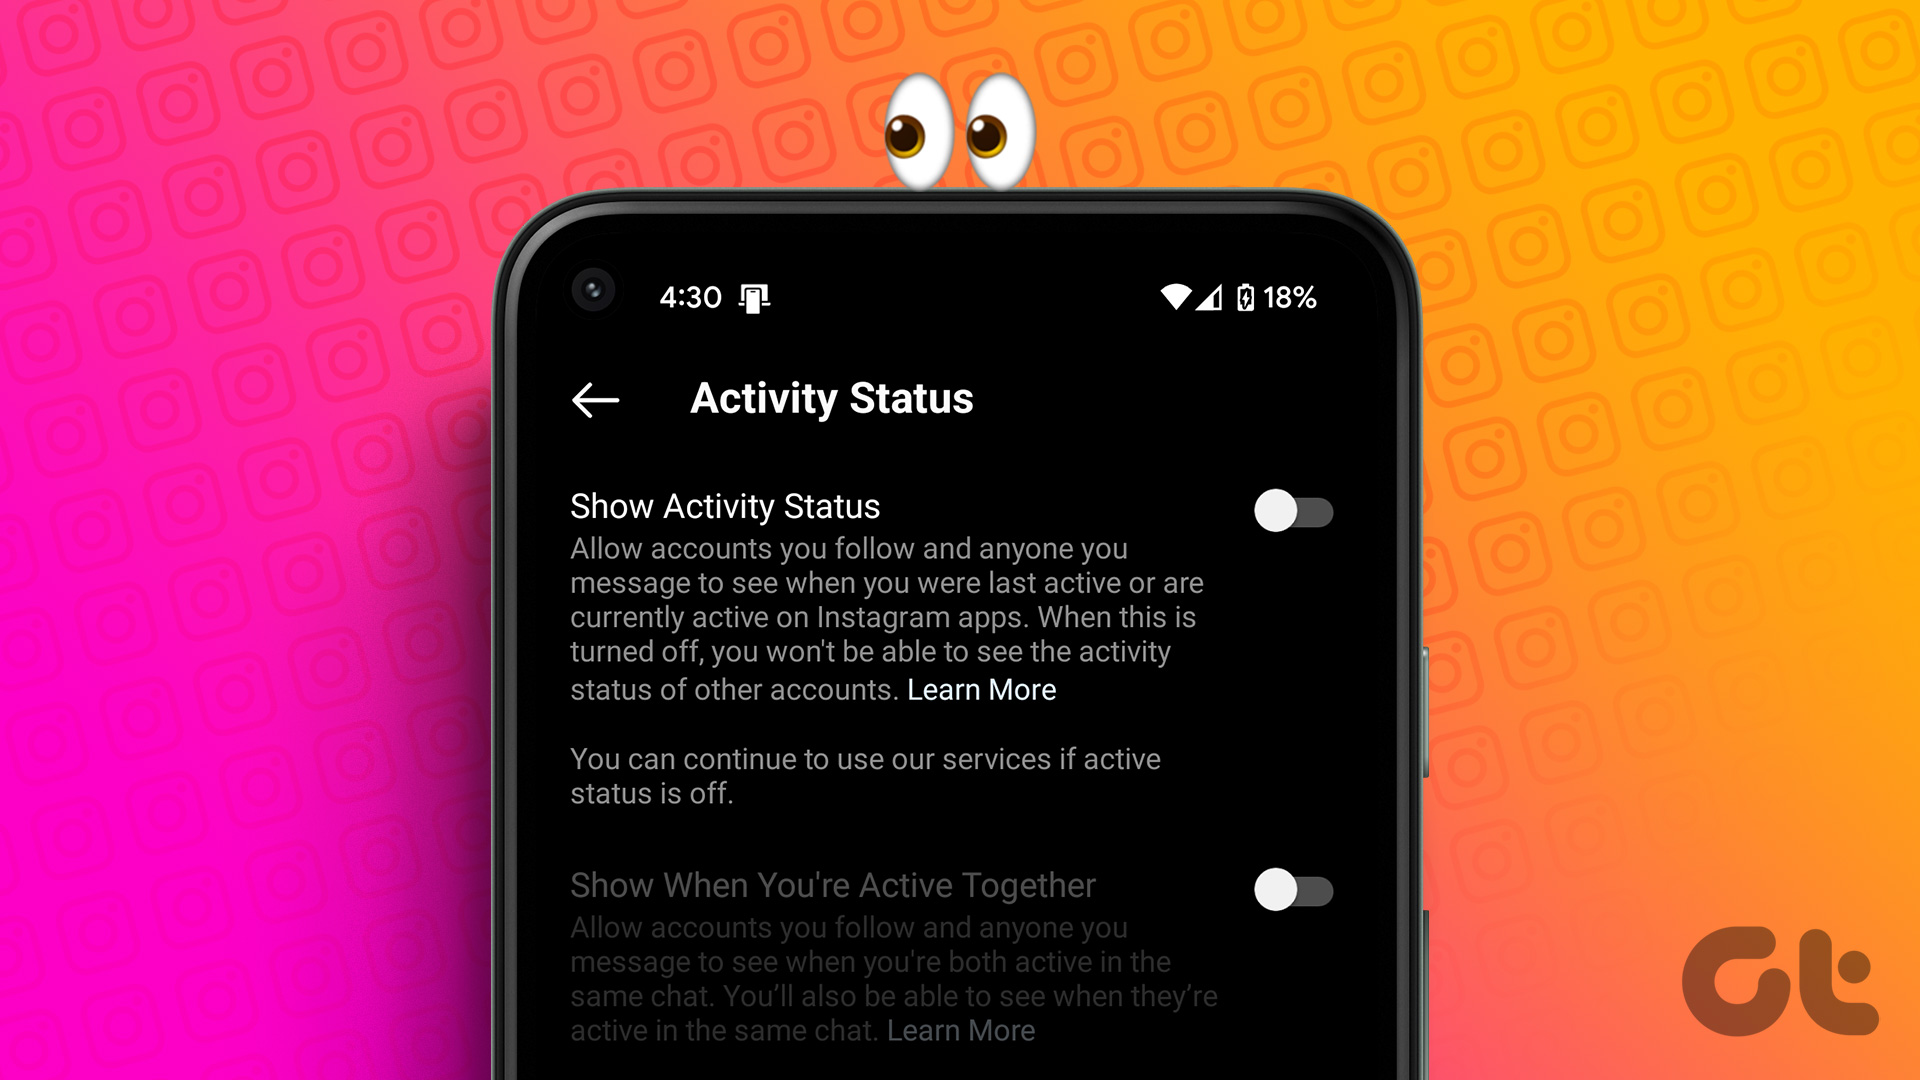 A screenshot of the 'Activity Status' settings page in the Instagram app, with the option to turn off the 'Show Activity Status' feature disabled.